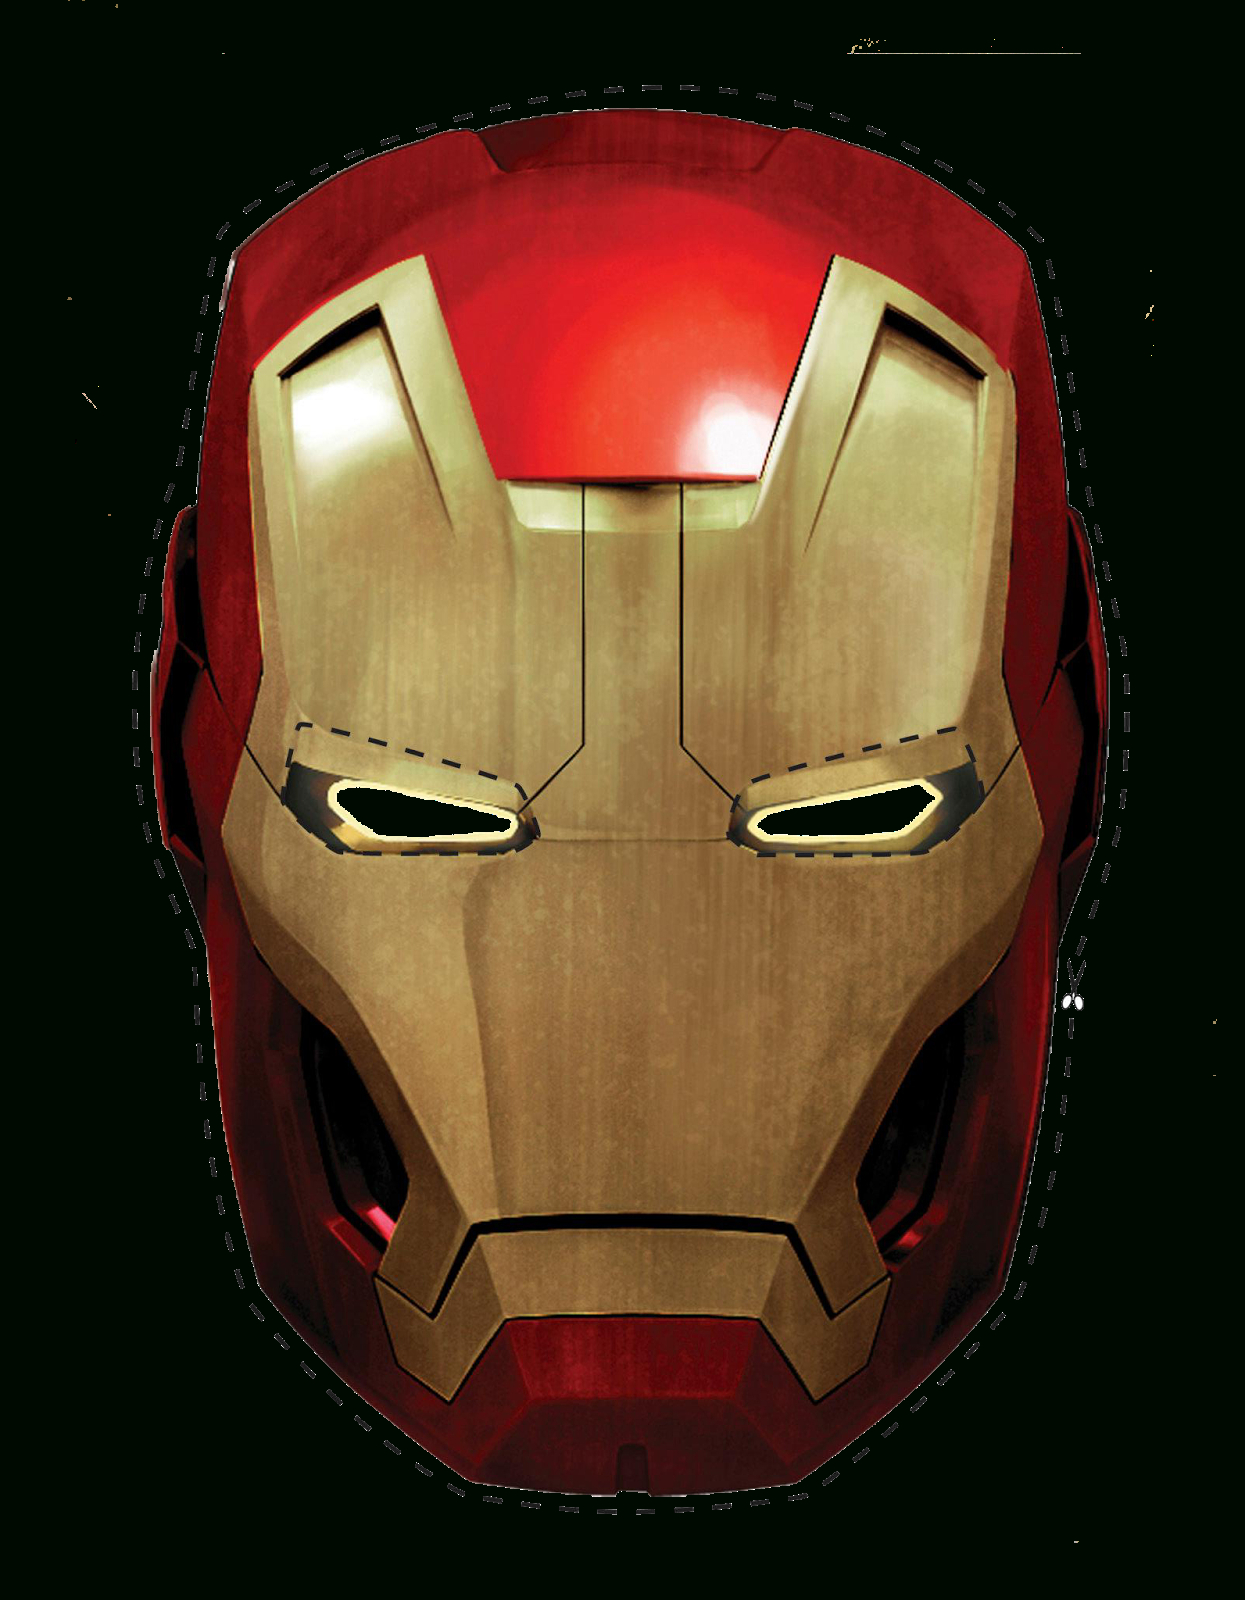 Free Printable Iron Man Mask. - Oh My Fiesta! For Geeks - Free Printable Ironman Mask